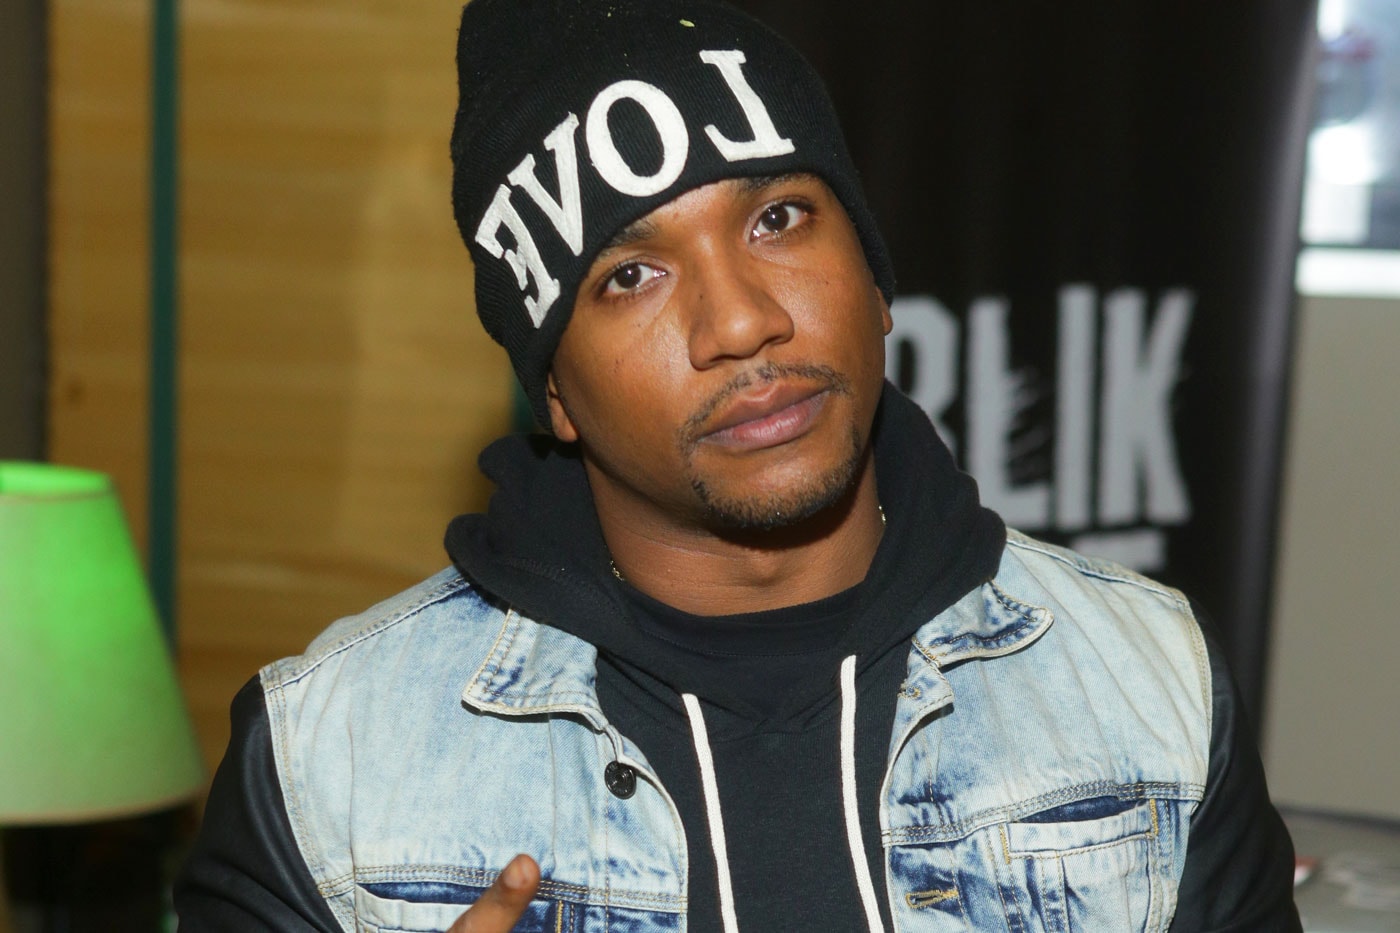 CyHi The Prynce Announces New Album, Releases New Video Video/Single, "Like It Or Not"